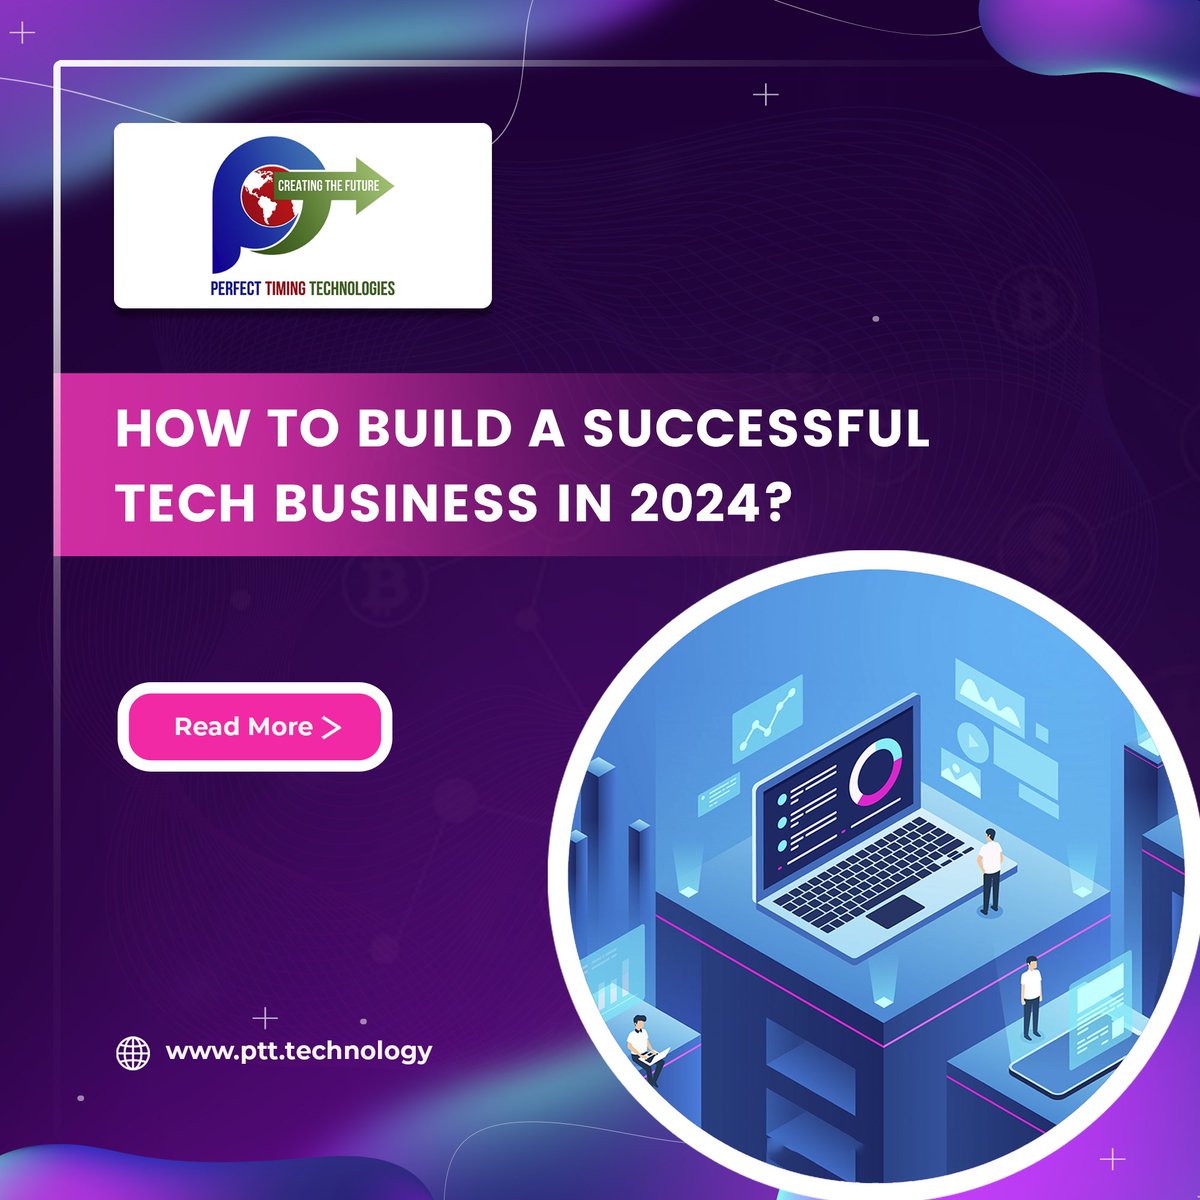 HOW TO BUILD A SUCCESSFUL TECH BUSINESS IN 2024?

Read Here: ptt.technology/2023/12/how-to…

#TechBusiness #BusinessSuccess #2024Tech #TechEntrepreneurship #StartupGuide #Entrepreneurship #BusinessDevelopment #TechInnovation #TechTrends #PerfectTimingTechnologies #PerfectTimingHolding